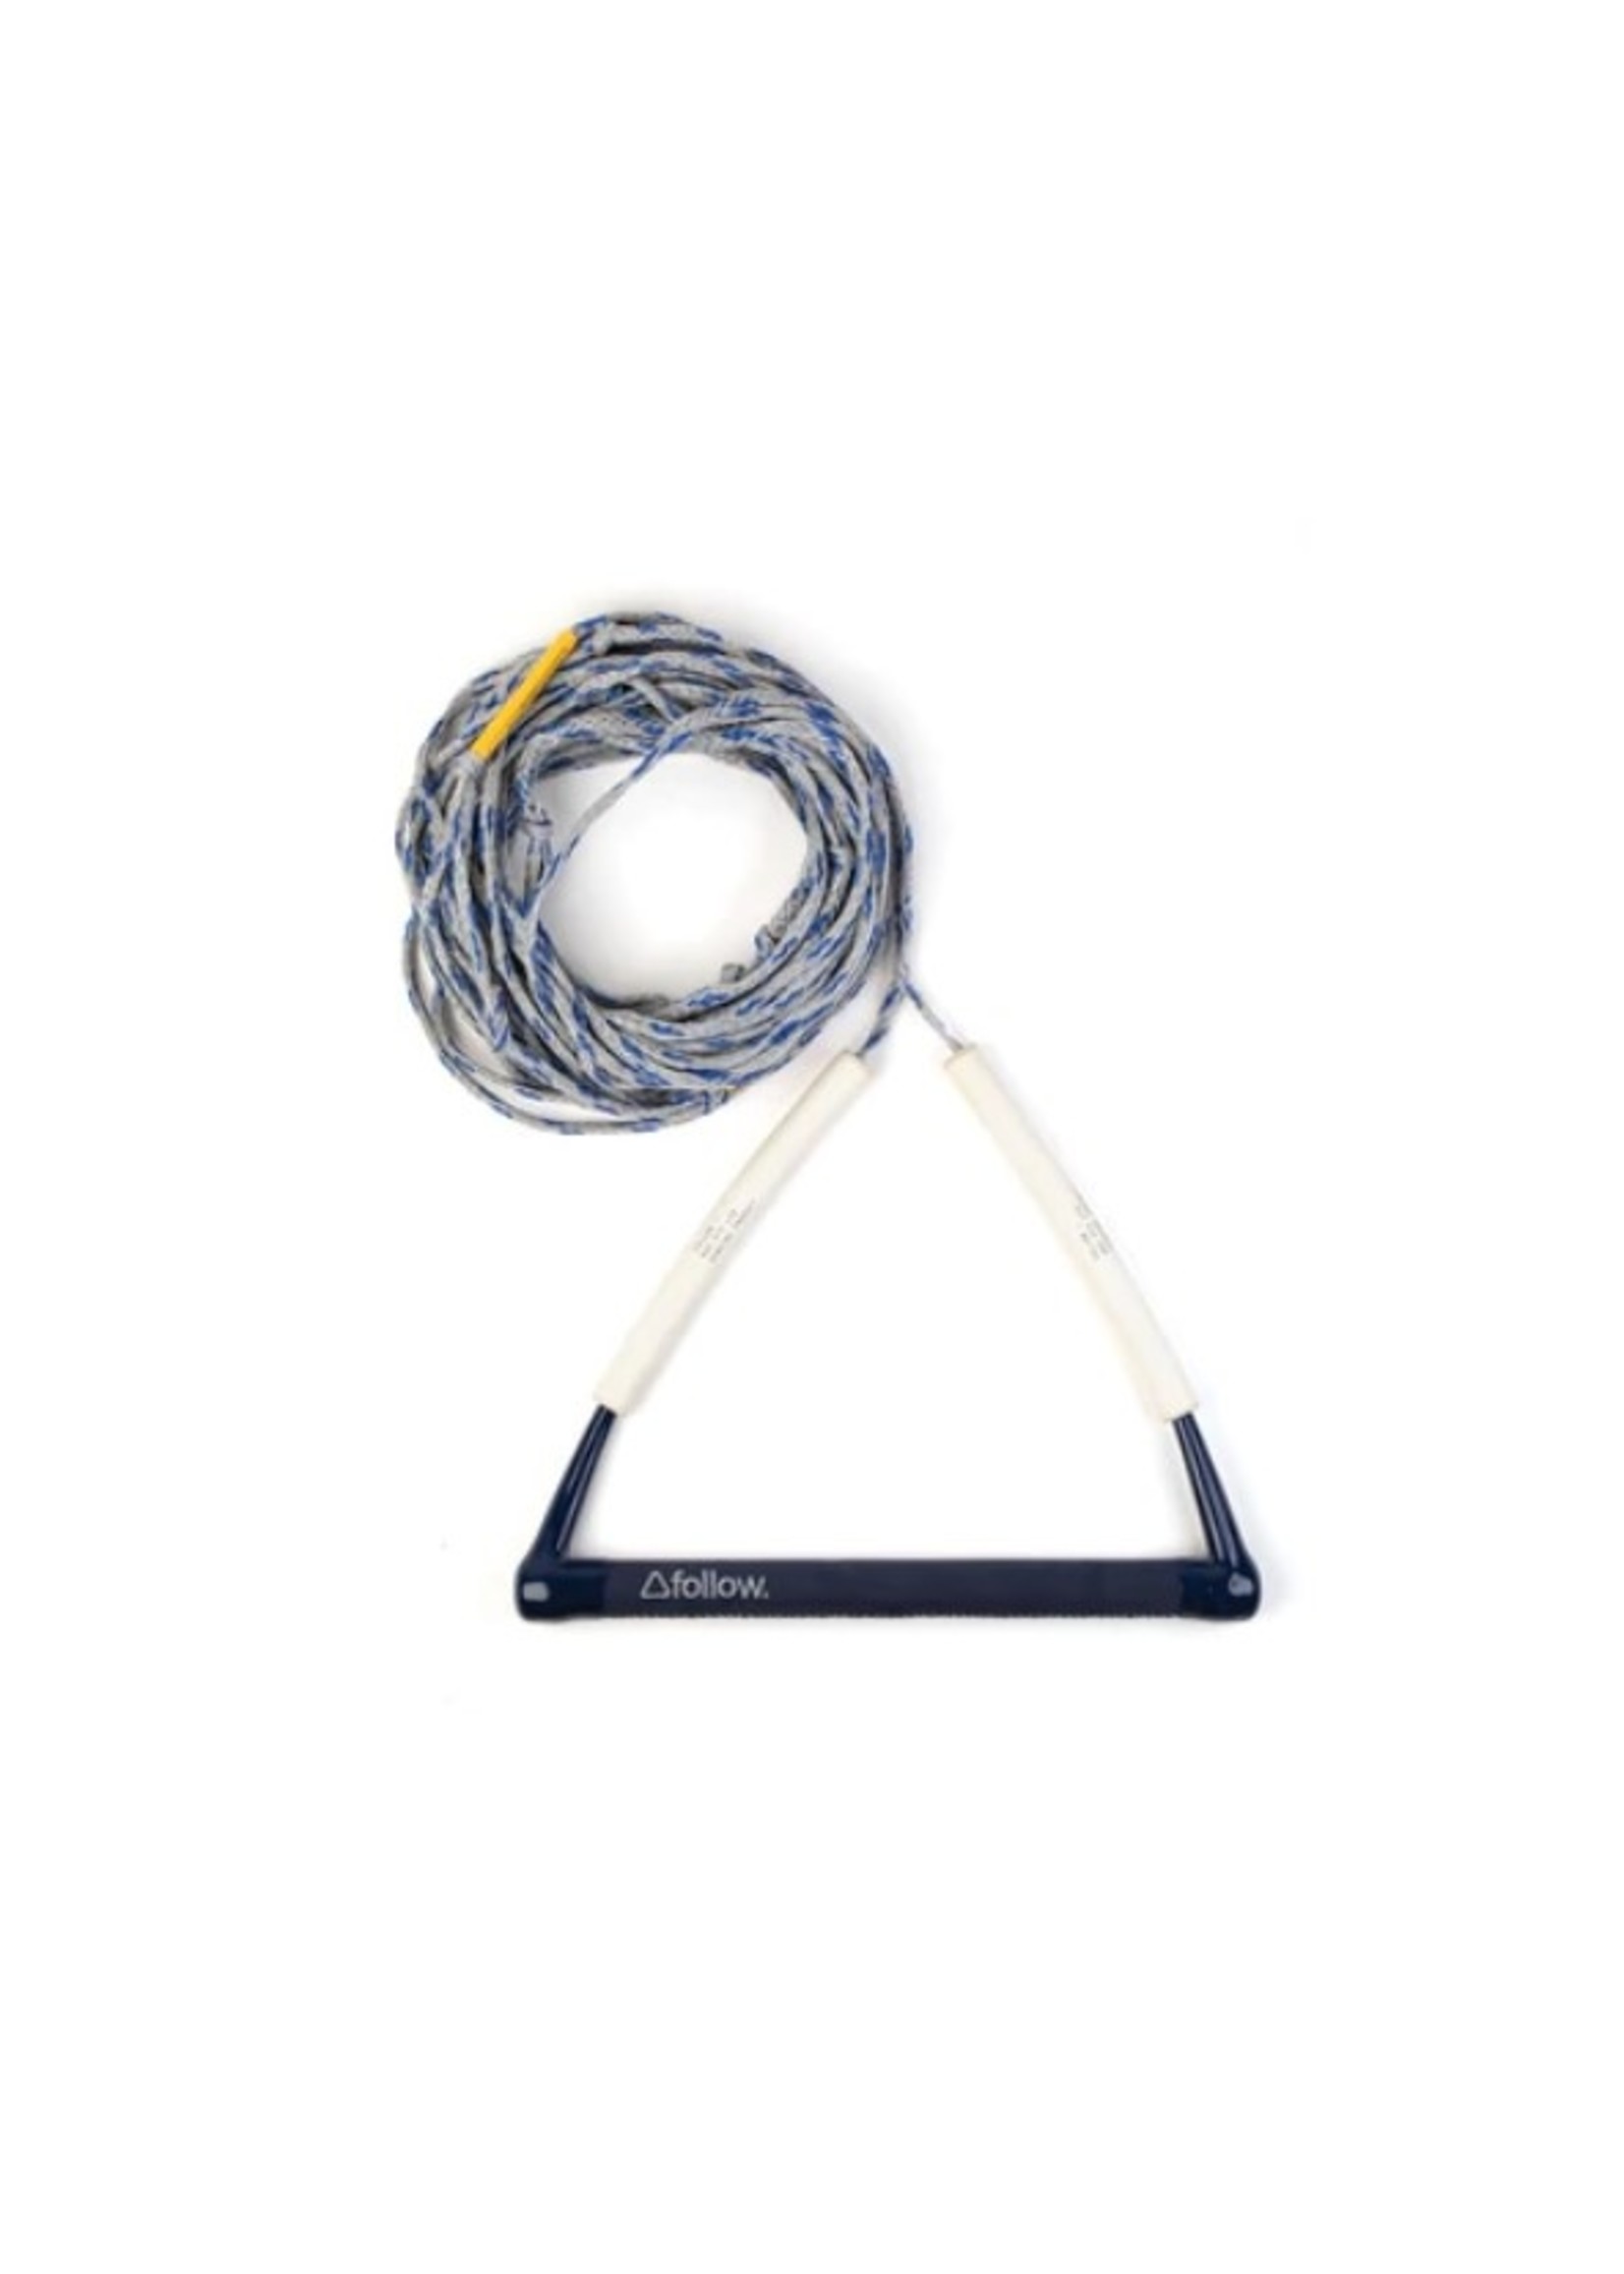 Follow BASIC PACKAGE ROPE